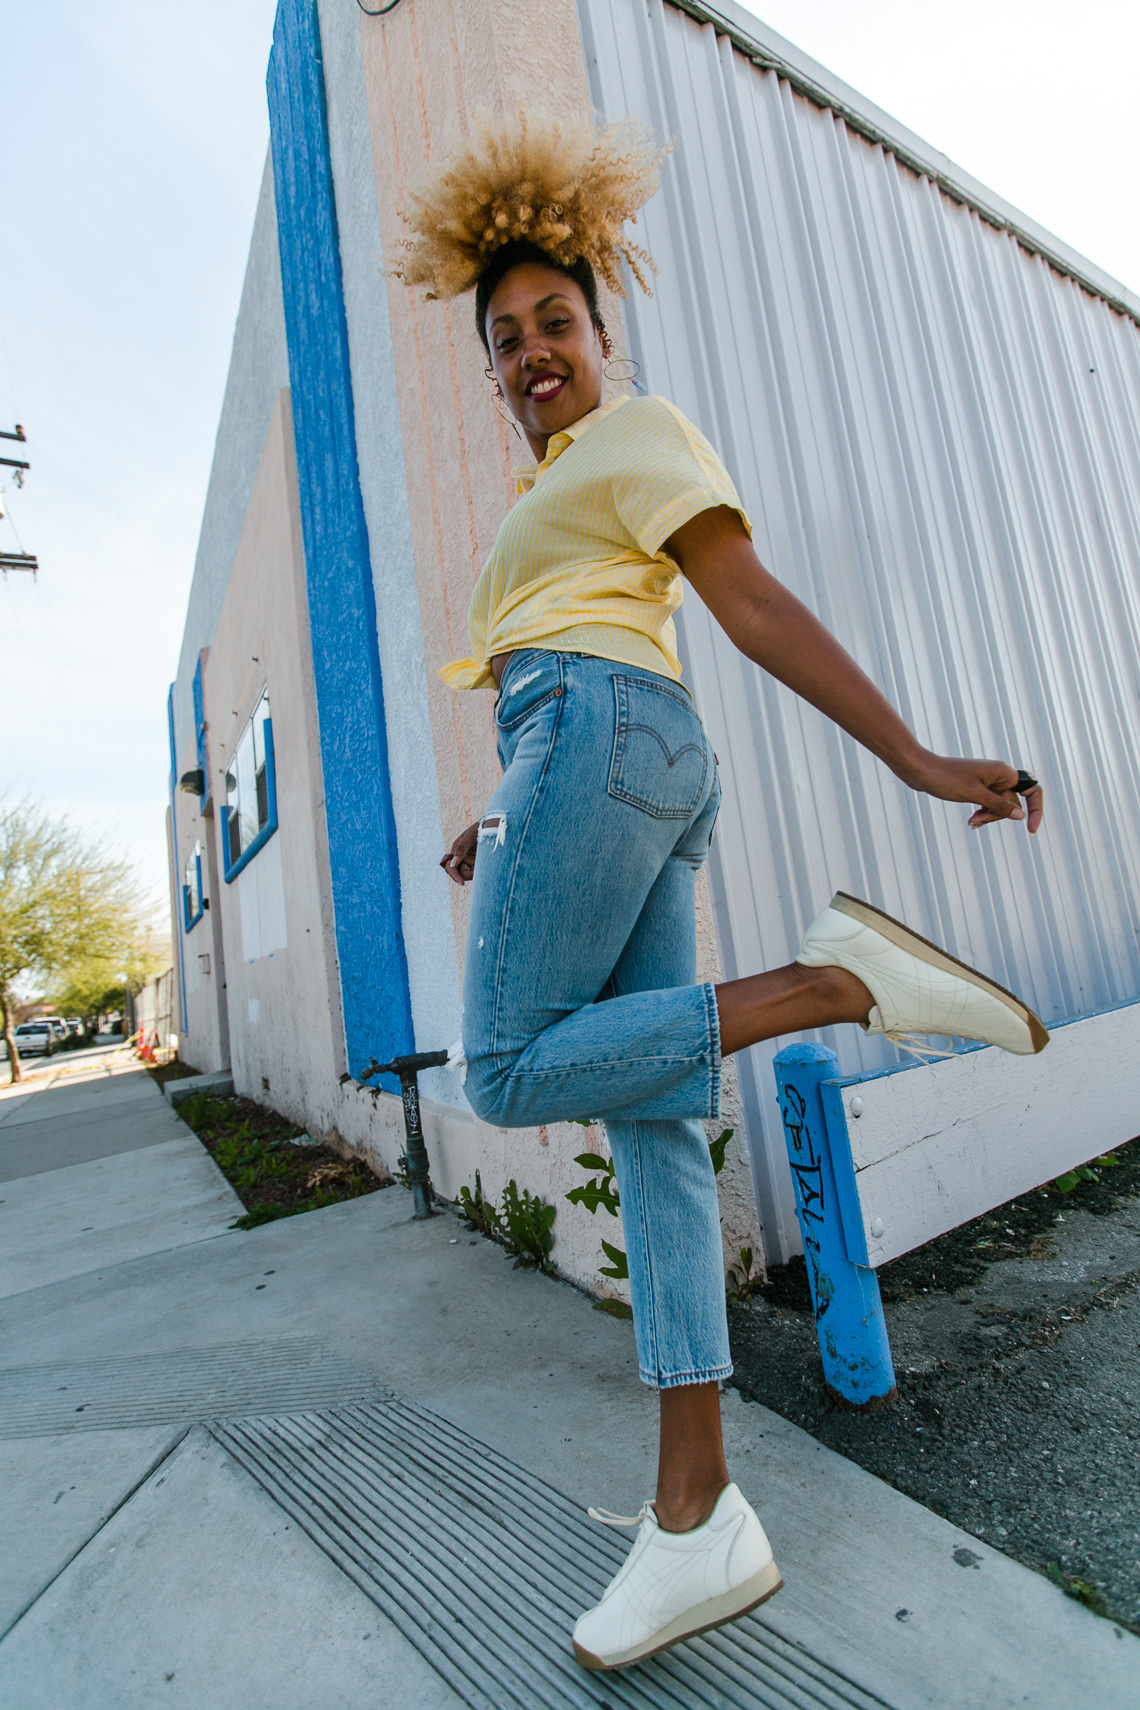 h&m-wear who you are-levis wedgie fit jeans-rsee-yellow blouse-summer outfit-look 1